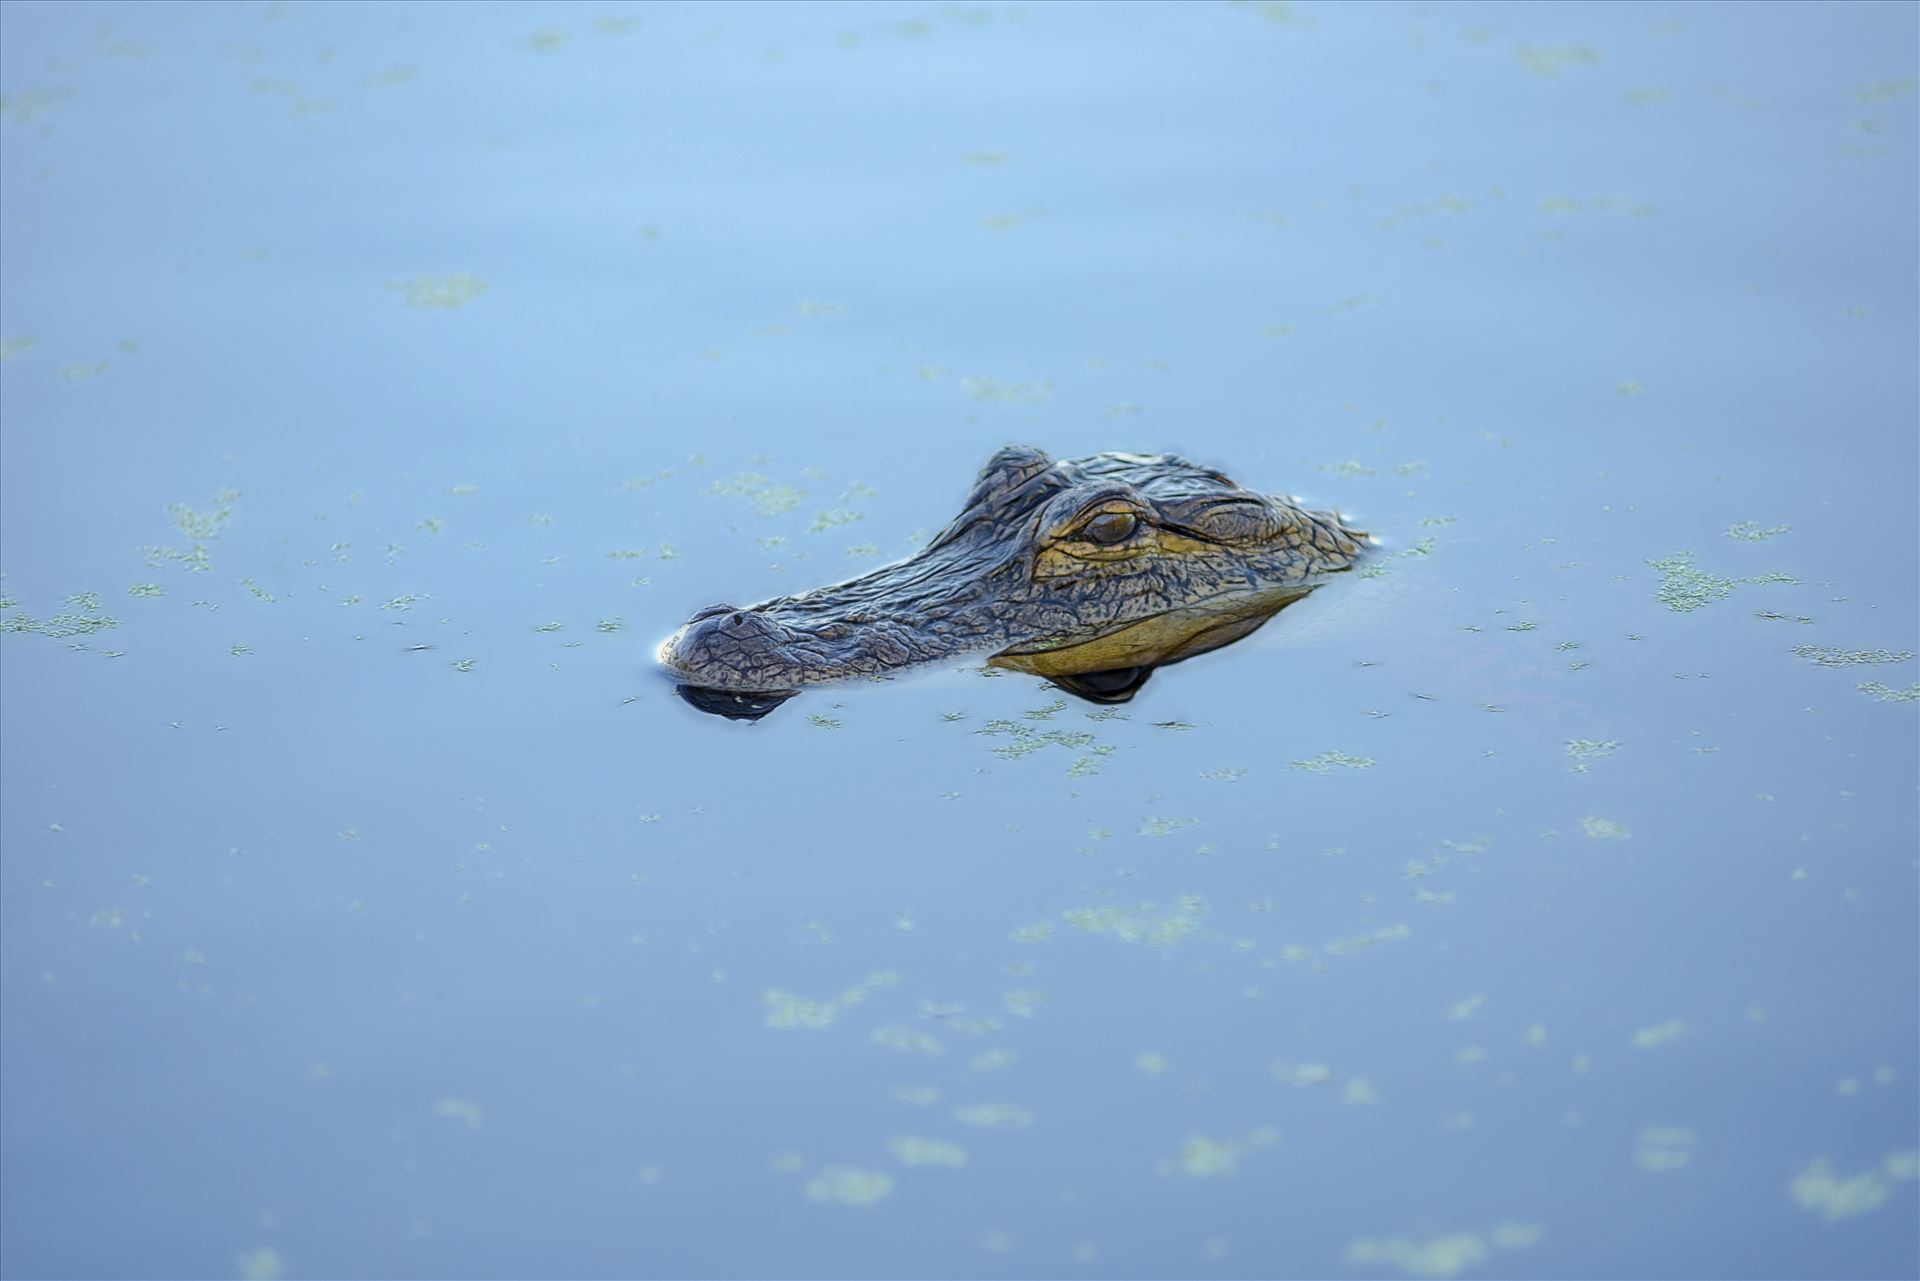 small gator at gator lake st. andrews state park panama city florida RAW3960.jpg  by Terry Kelly Photography